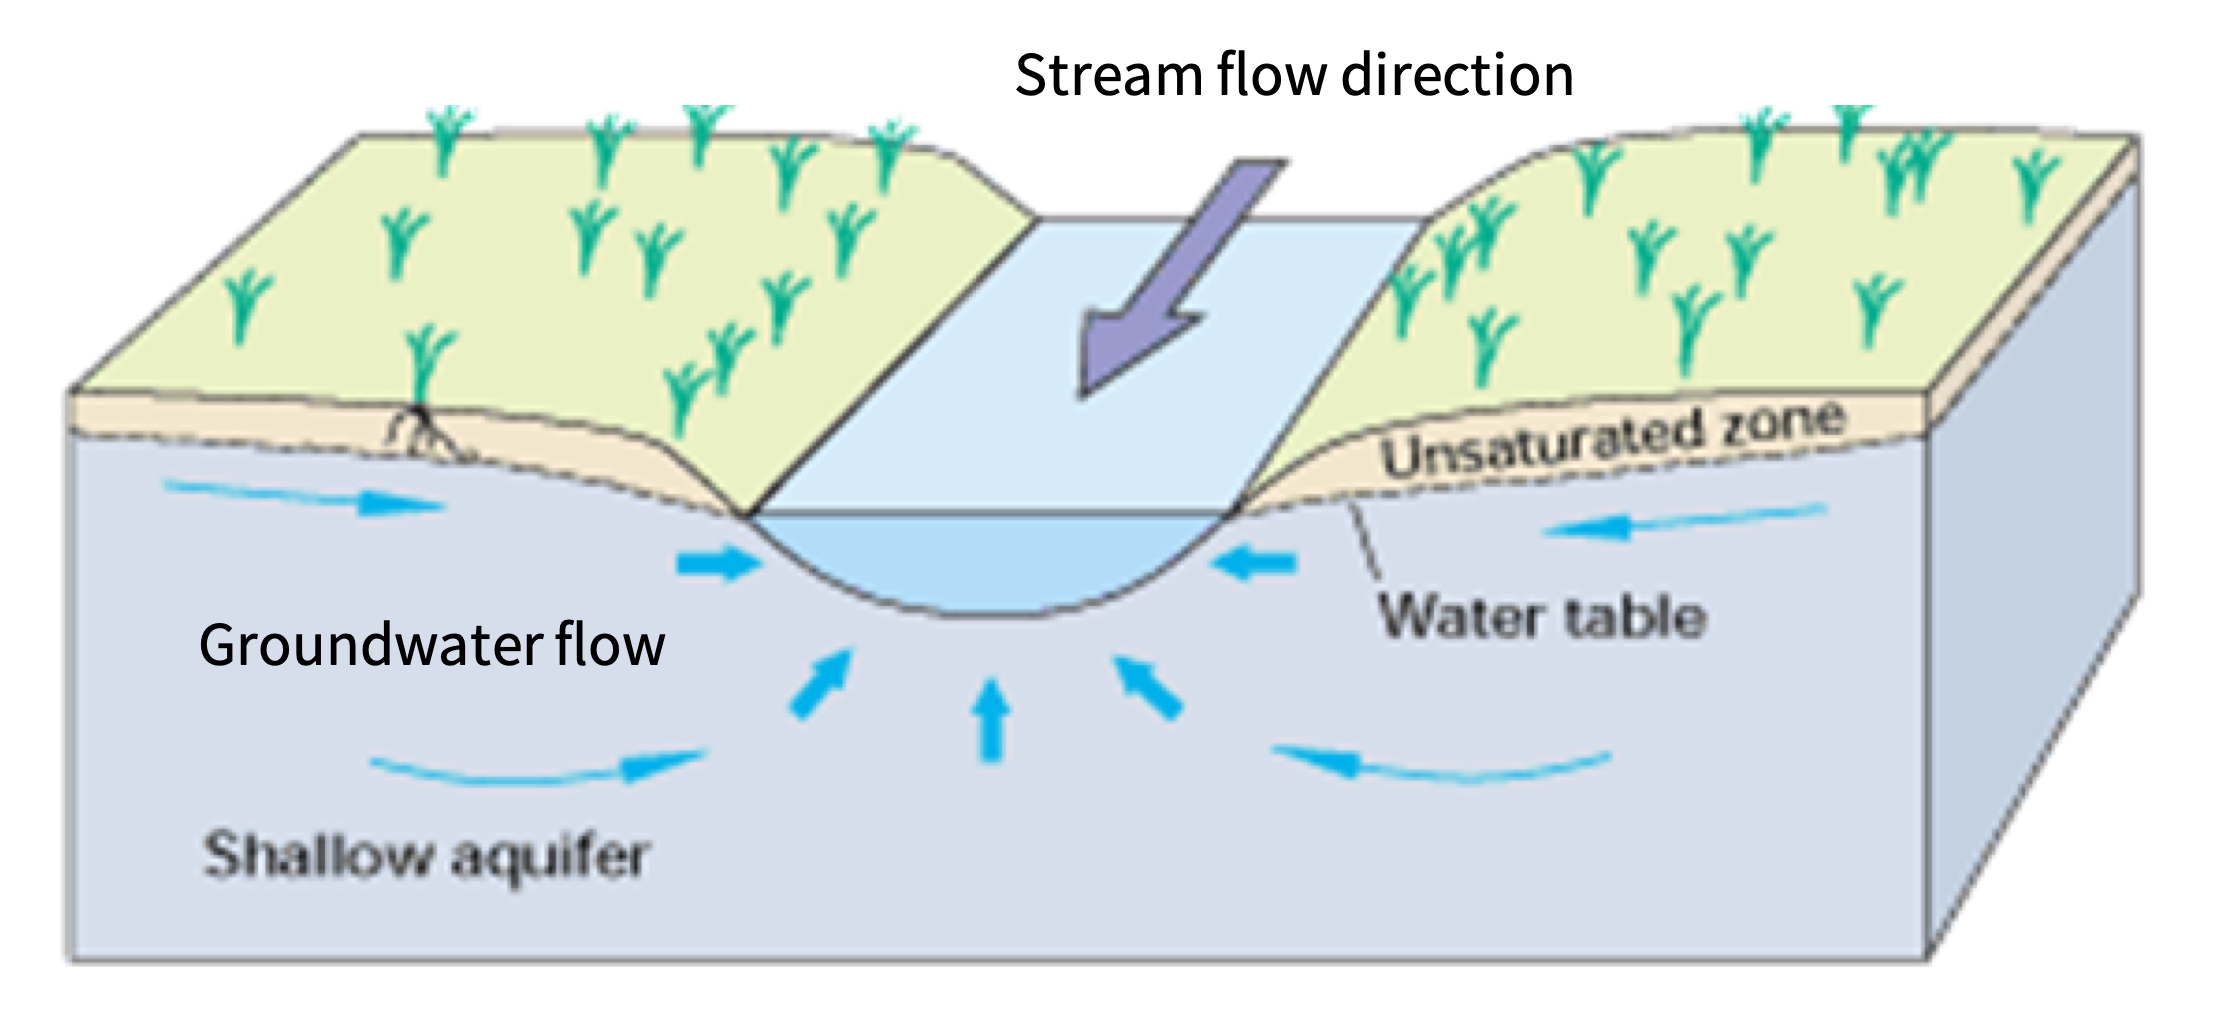 Groundwater discharge to a gaining stream.